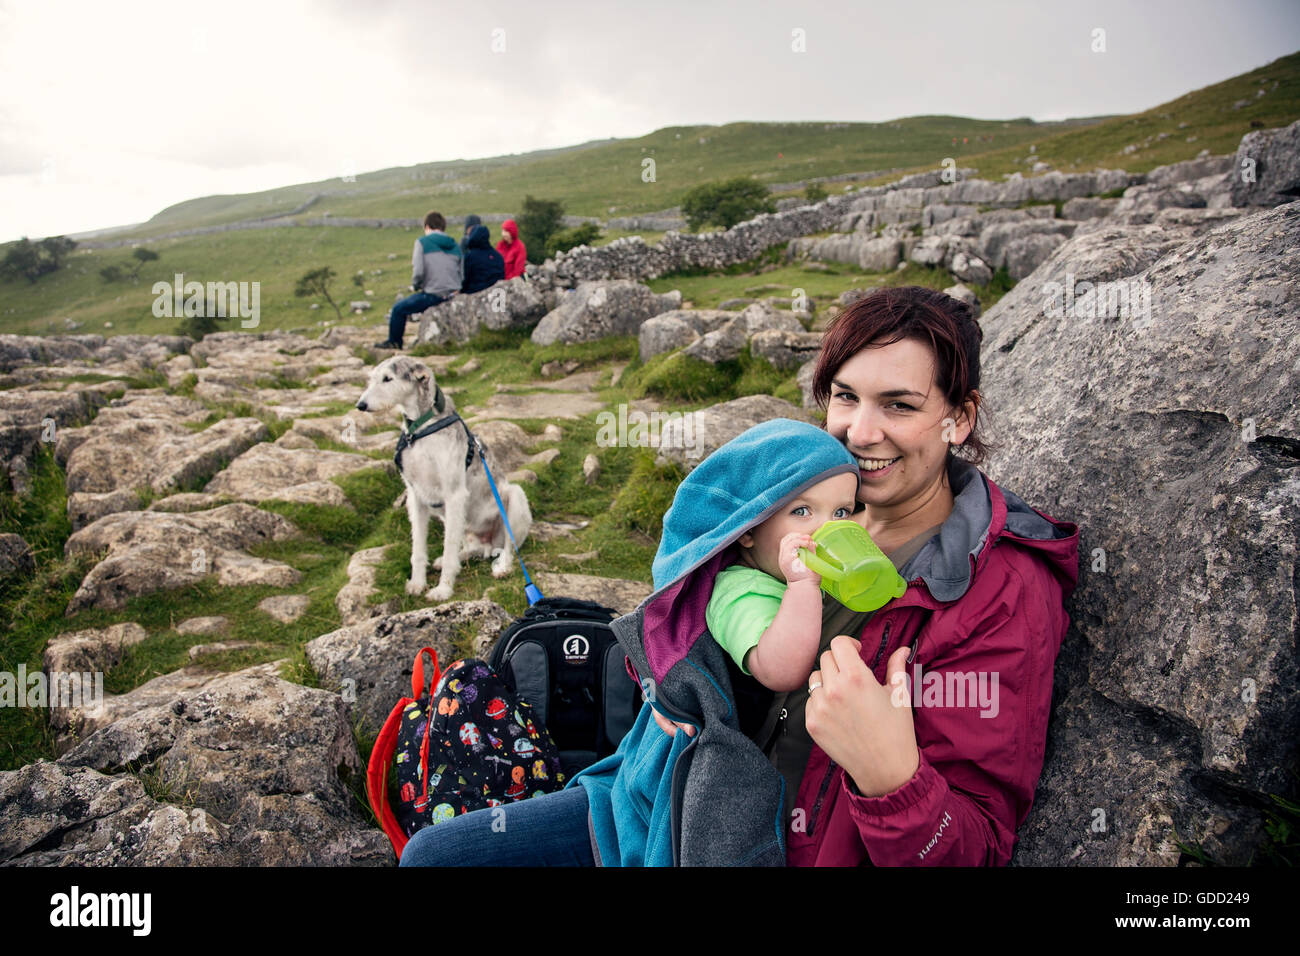 Mother, baby and dog out on a walk taking a break / breather above Malham Cove on the Limestone Pavement Stock Photo